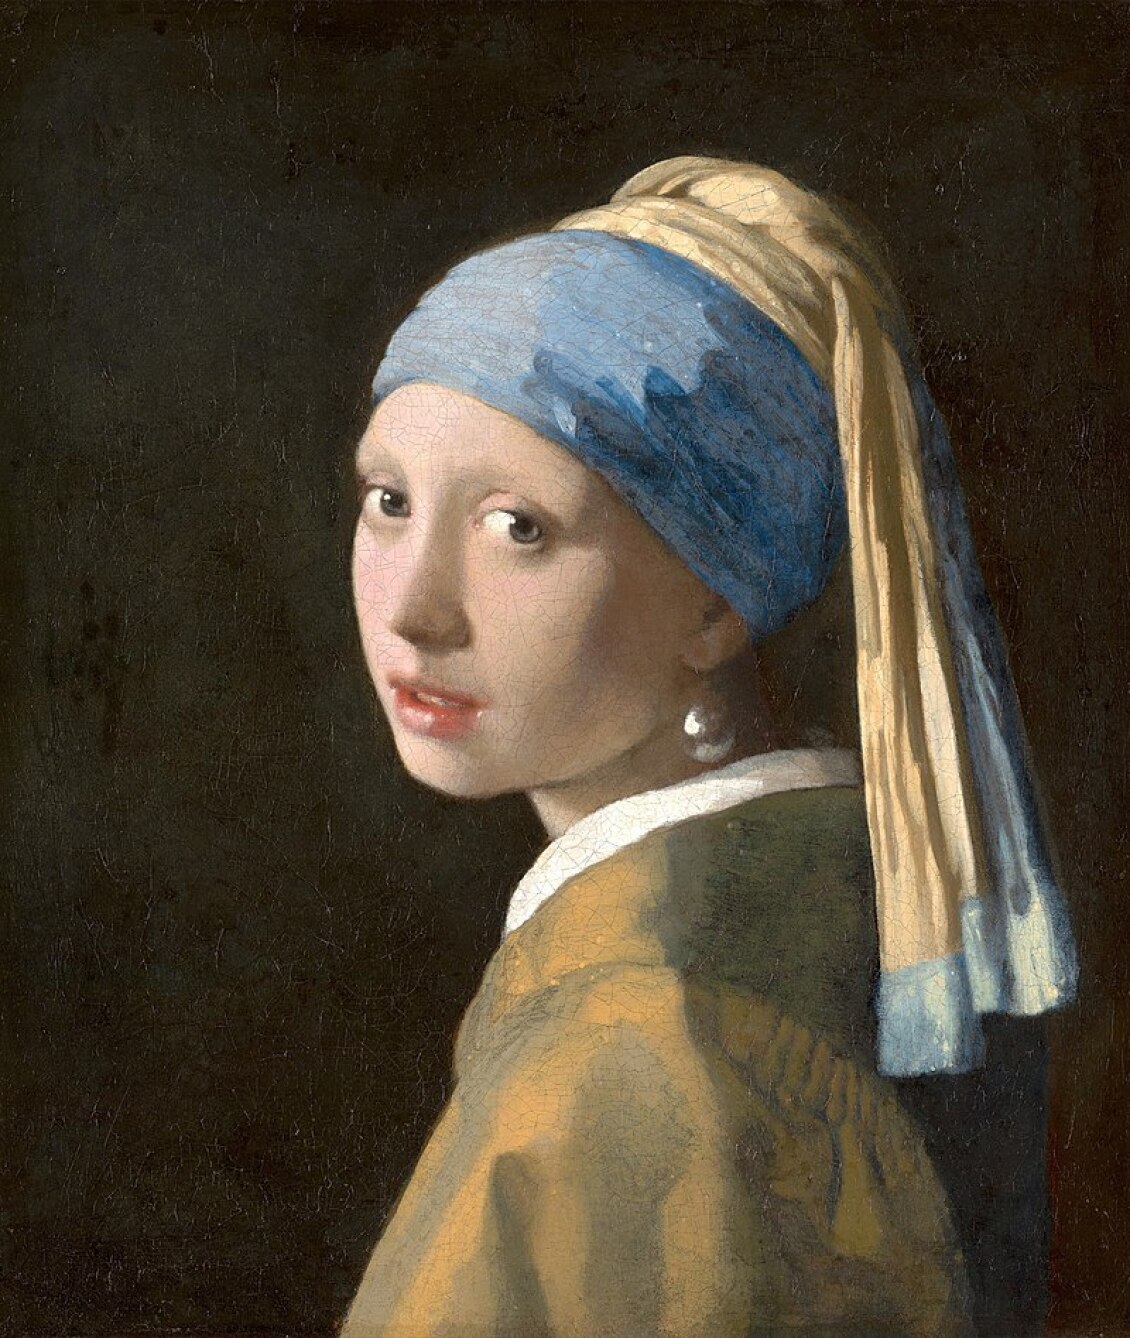 1665_Girl_with_a_Pearl_Earring